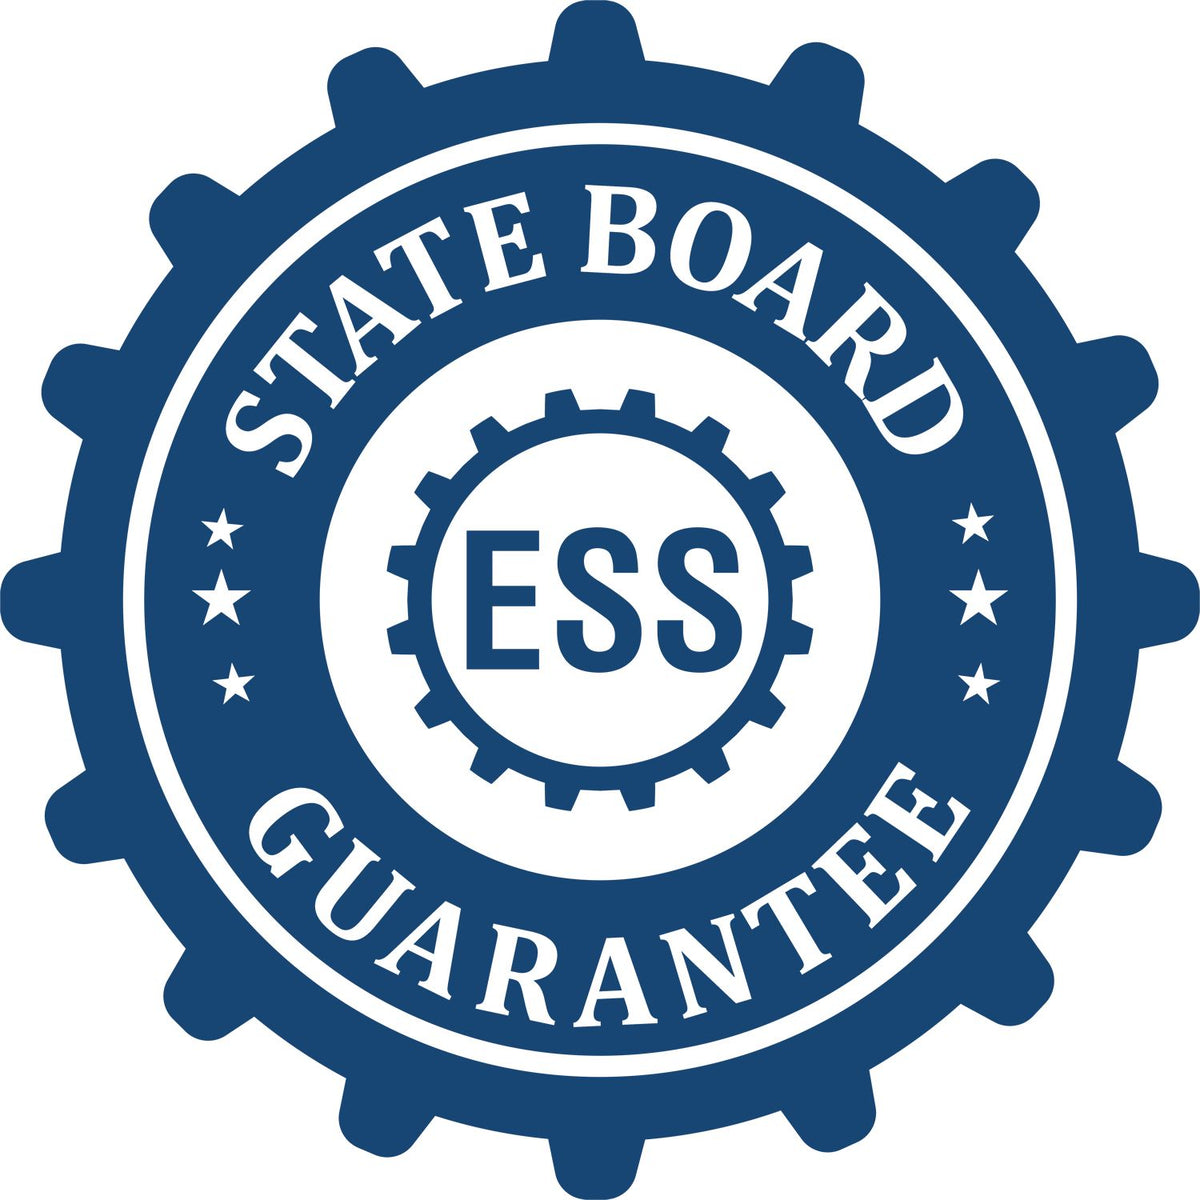 An emblem in a gear shape illustrating a state board guarantee for the Digital Vermont PE Stamp and Electronic Seal for Vermont Engineer product.